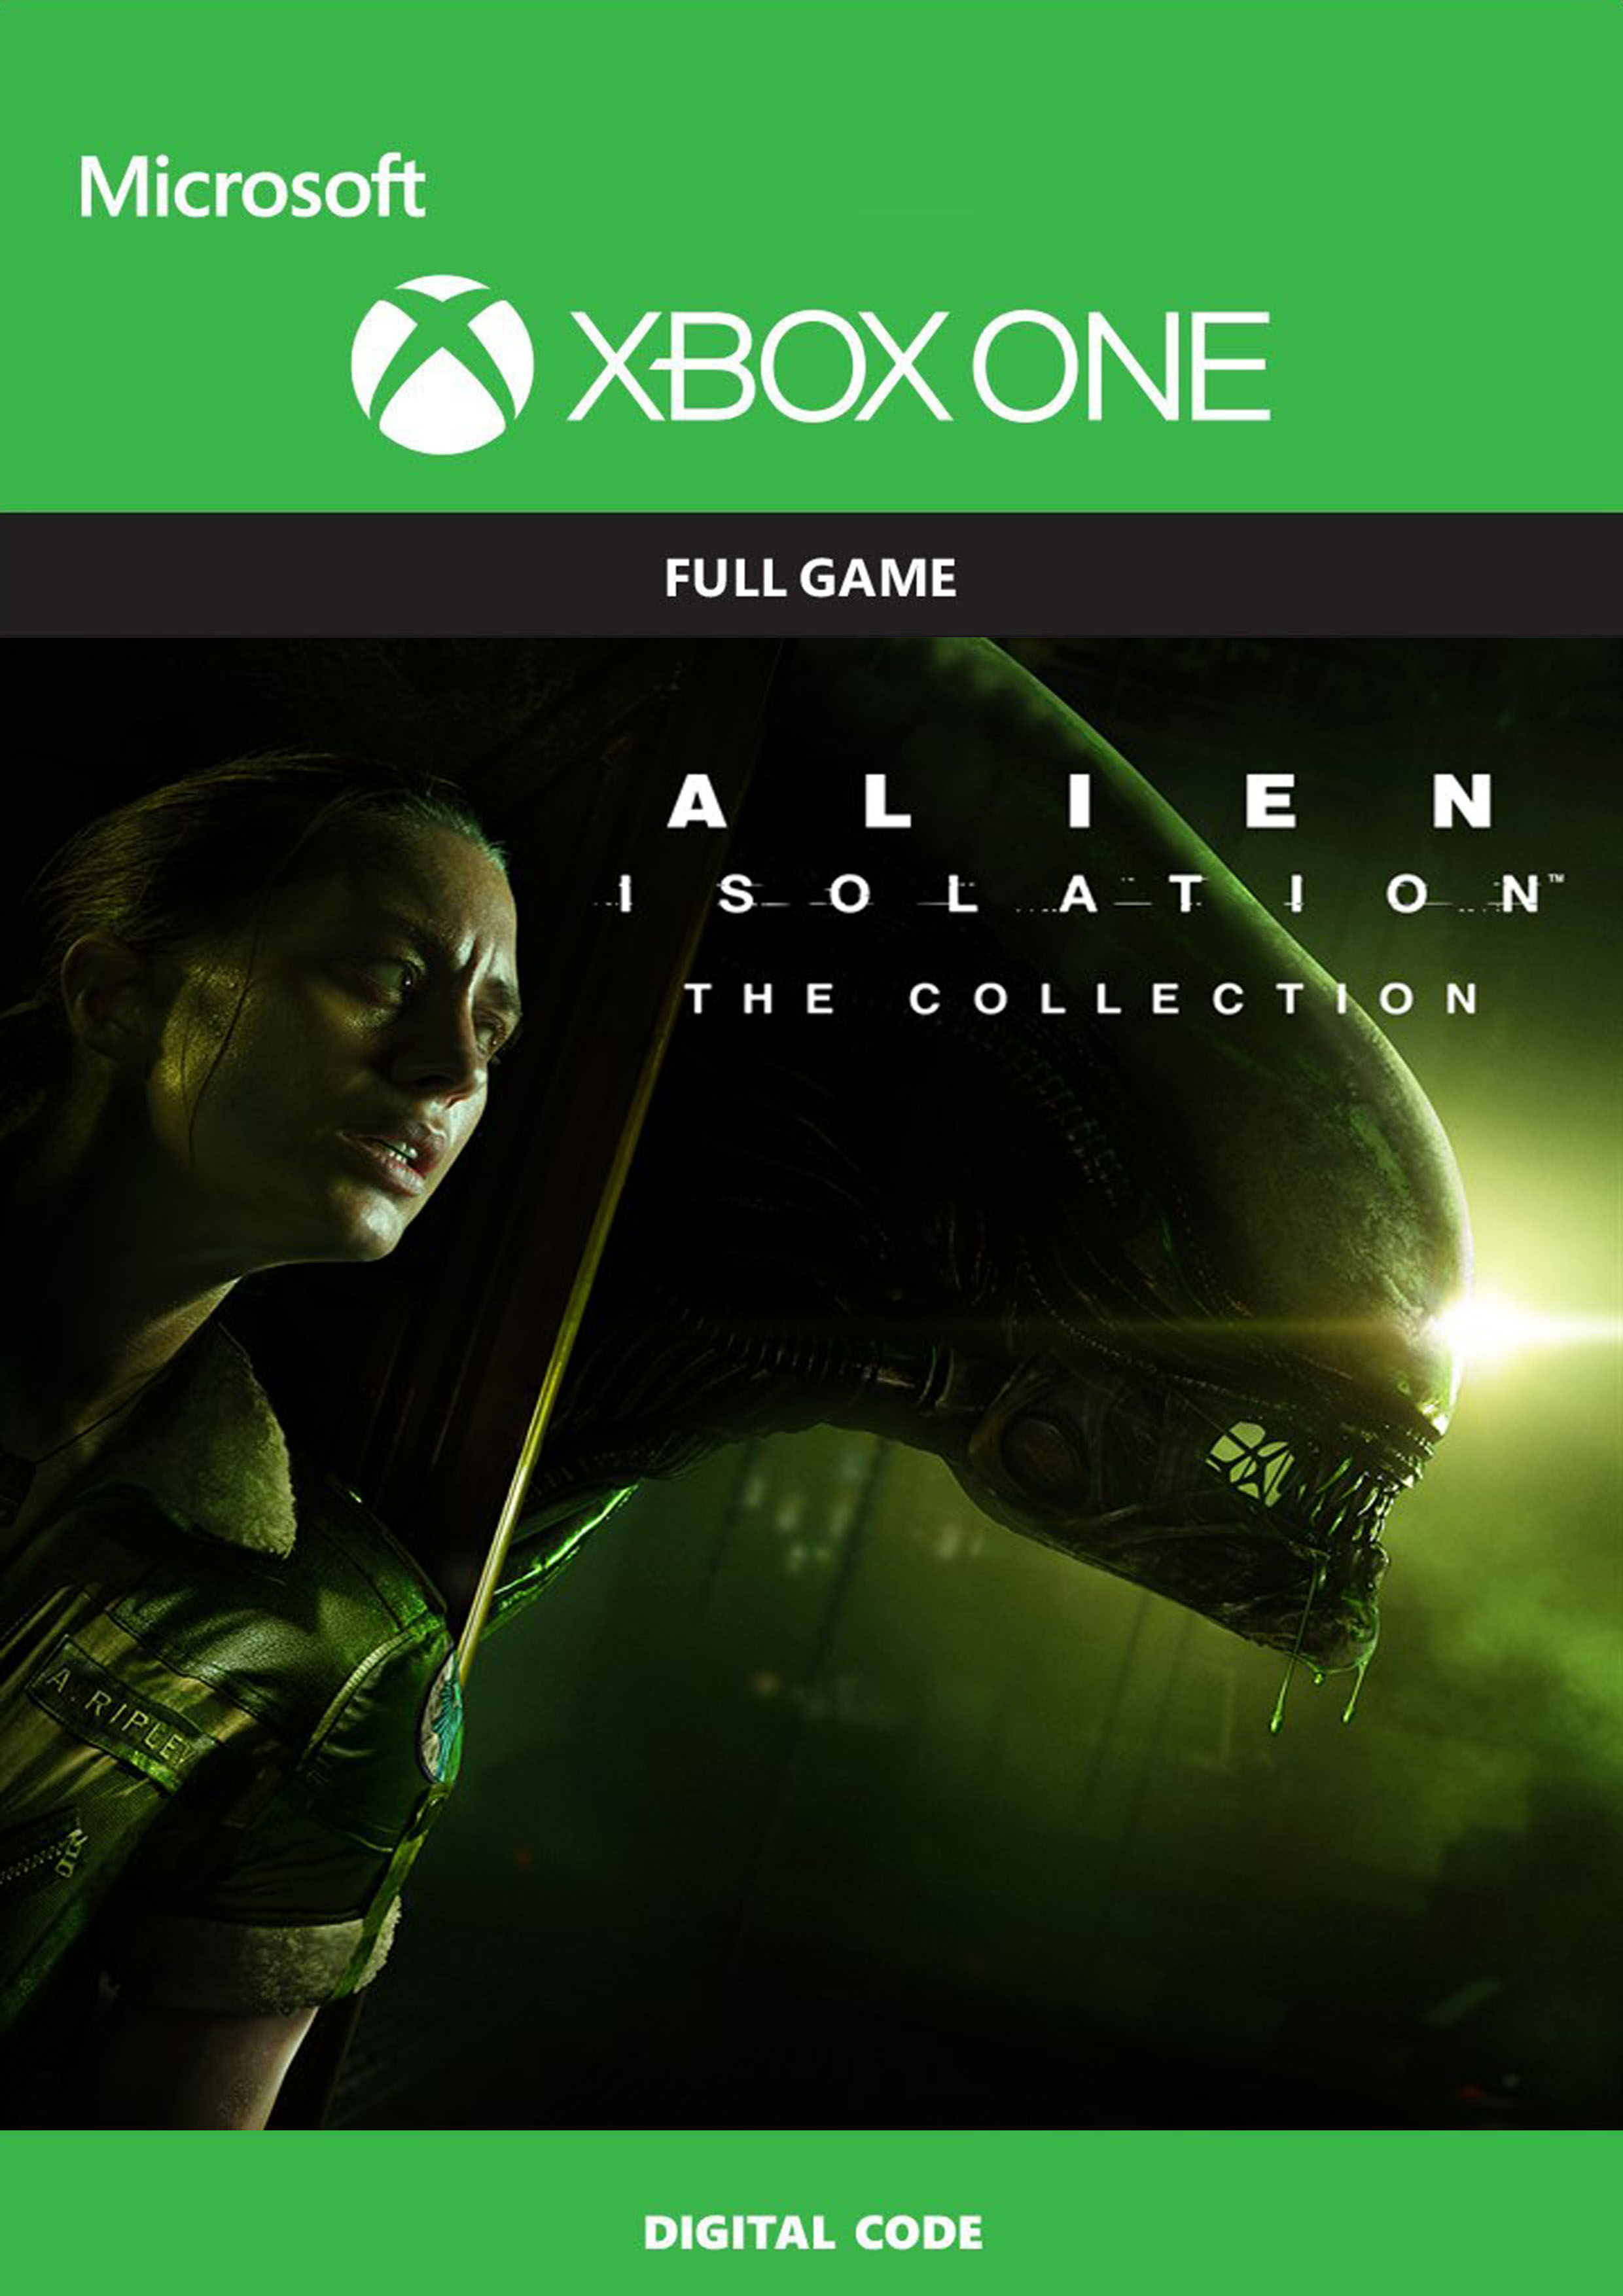 protestante sextante Pico Buy ✓❤️ALIEN: ISOLATION - THE COLLECTION❤️XBOX ONE|XS🔑KEY✓ and download